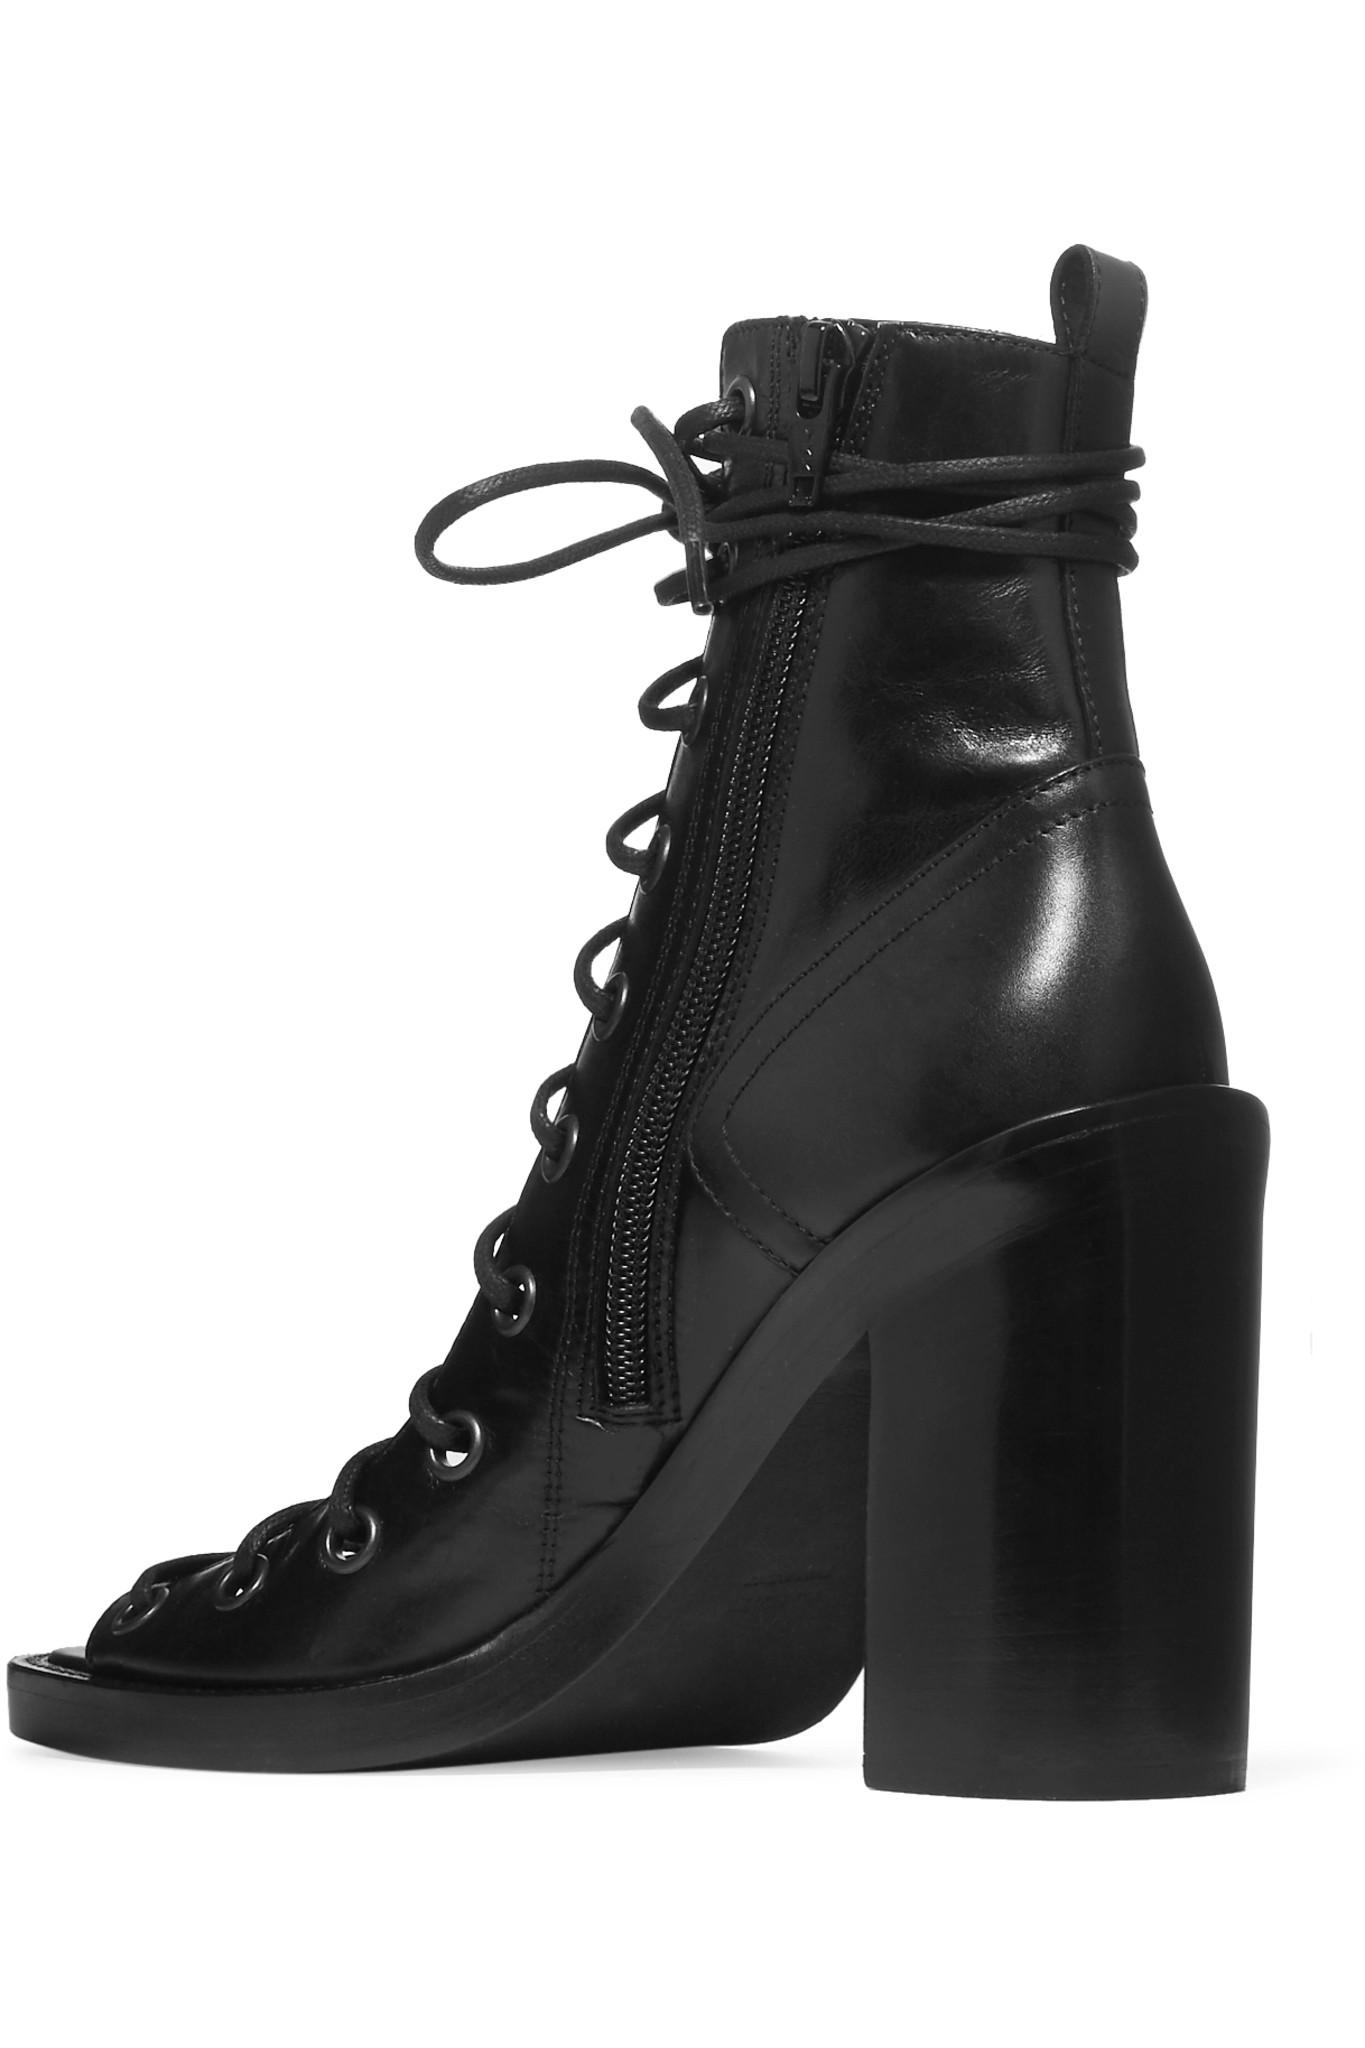 Lyst - Ann Demeulemeester Lace-up Leather Ankle Boots in Black